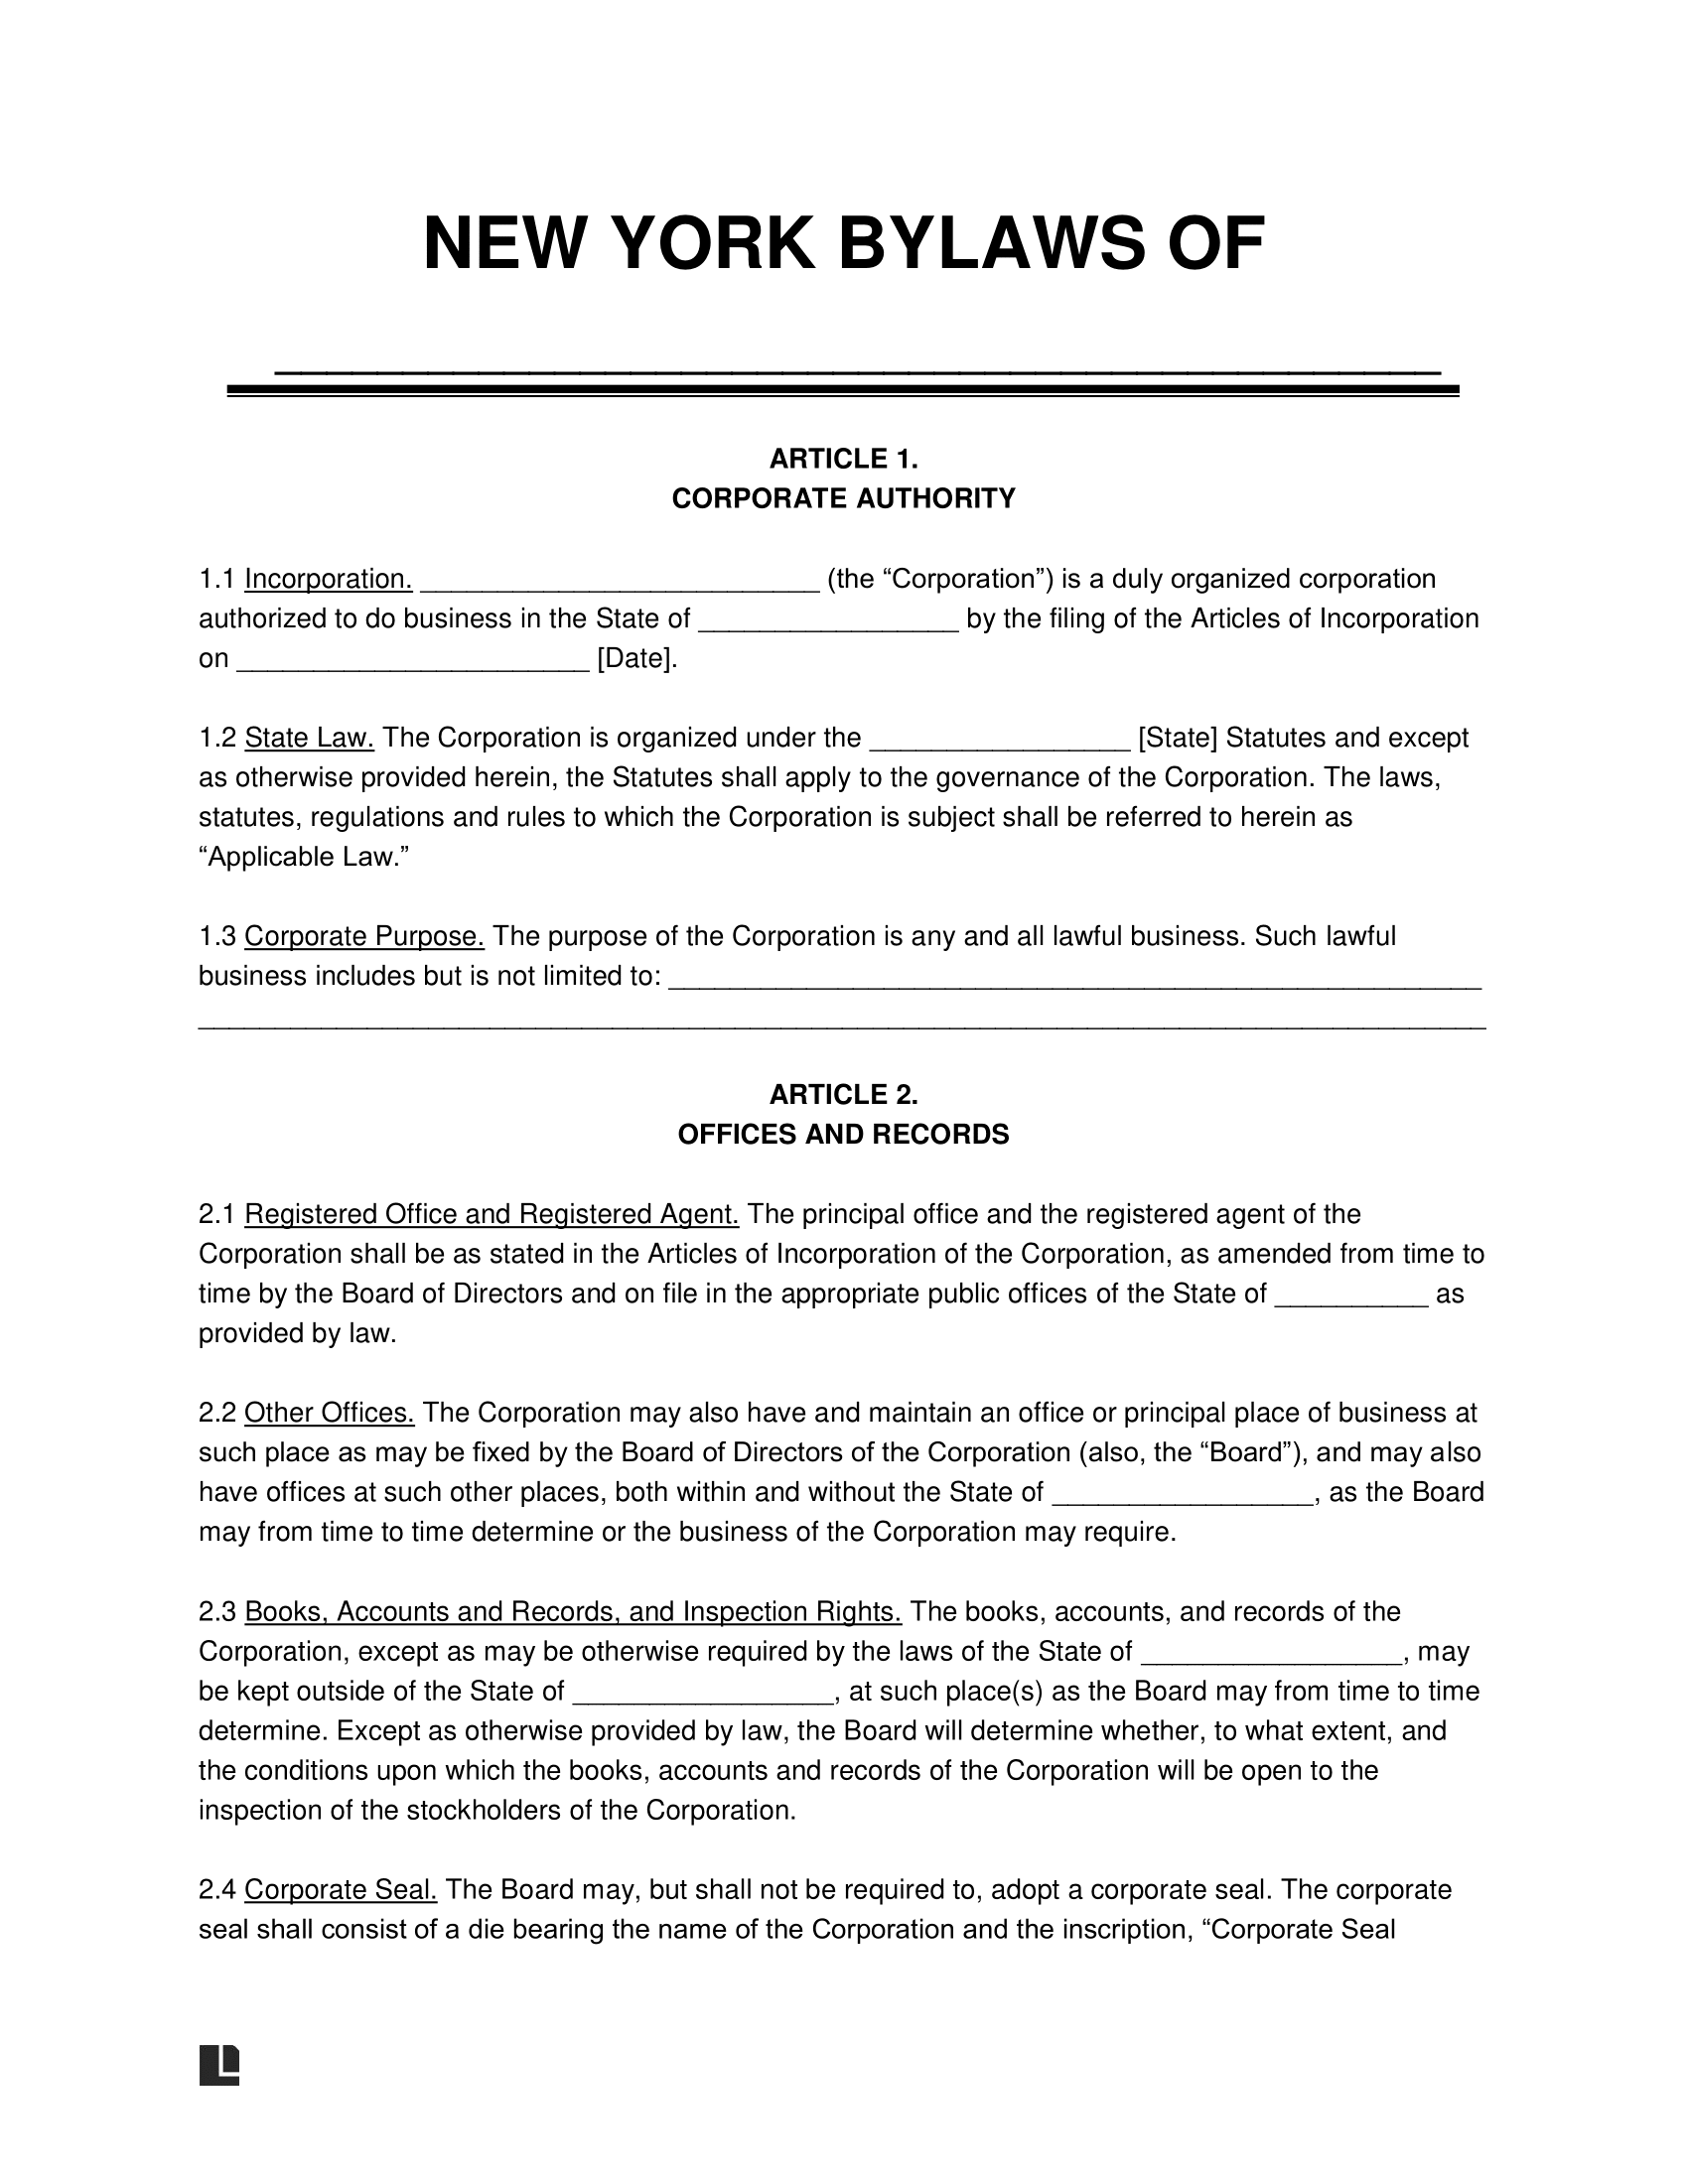 New York Corporate Bylaws Template